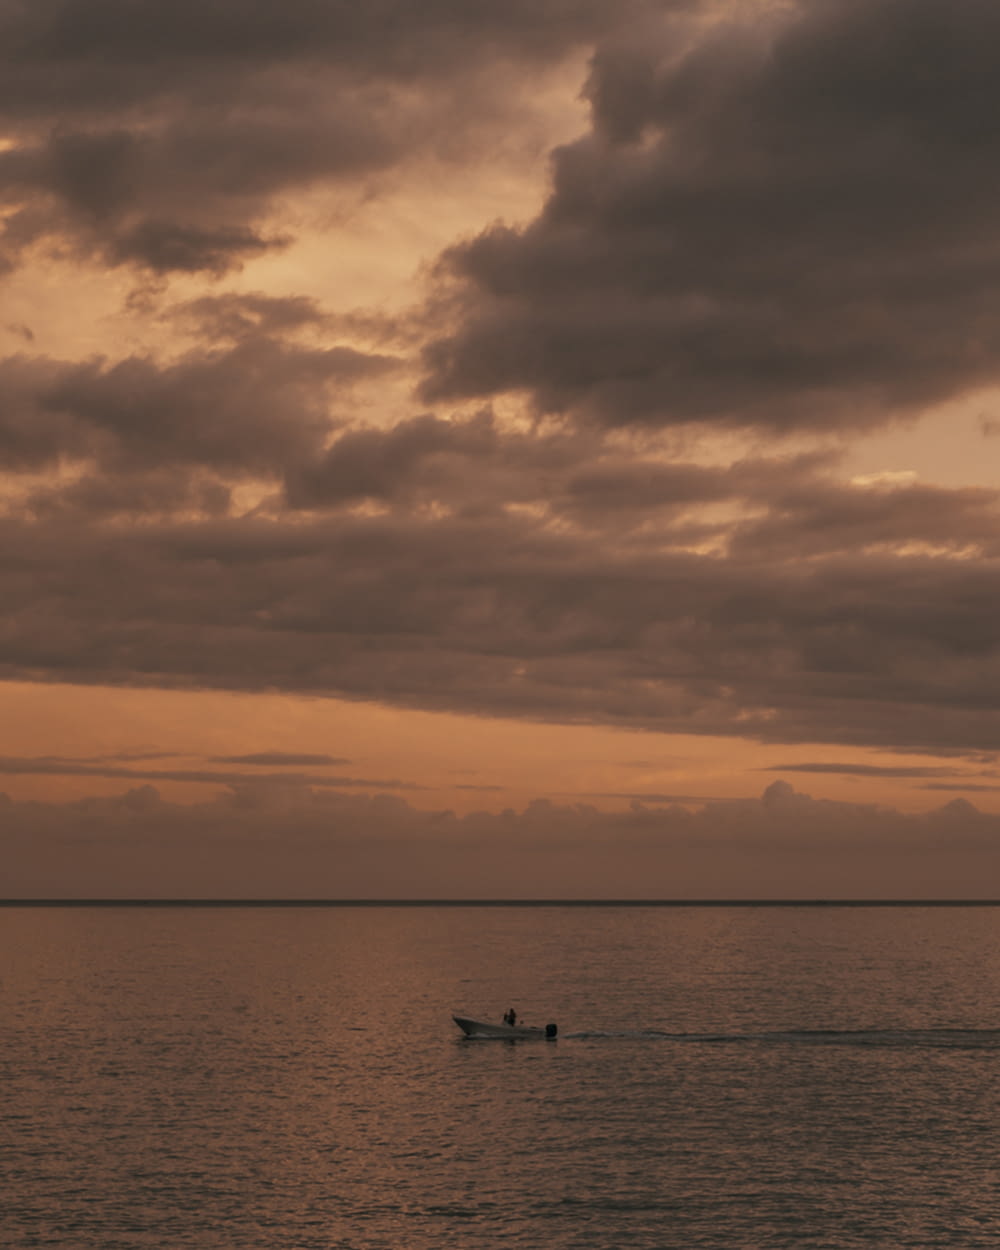 silhouette of 2 people riding boat on sea under cloudy sky during daytime